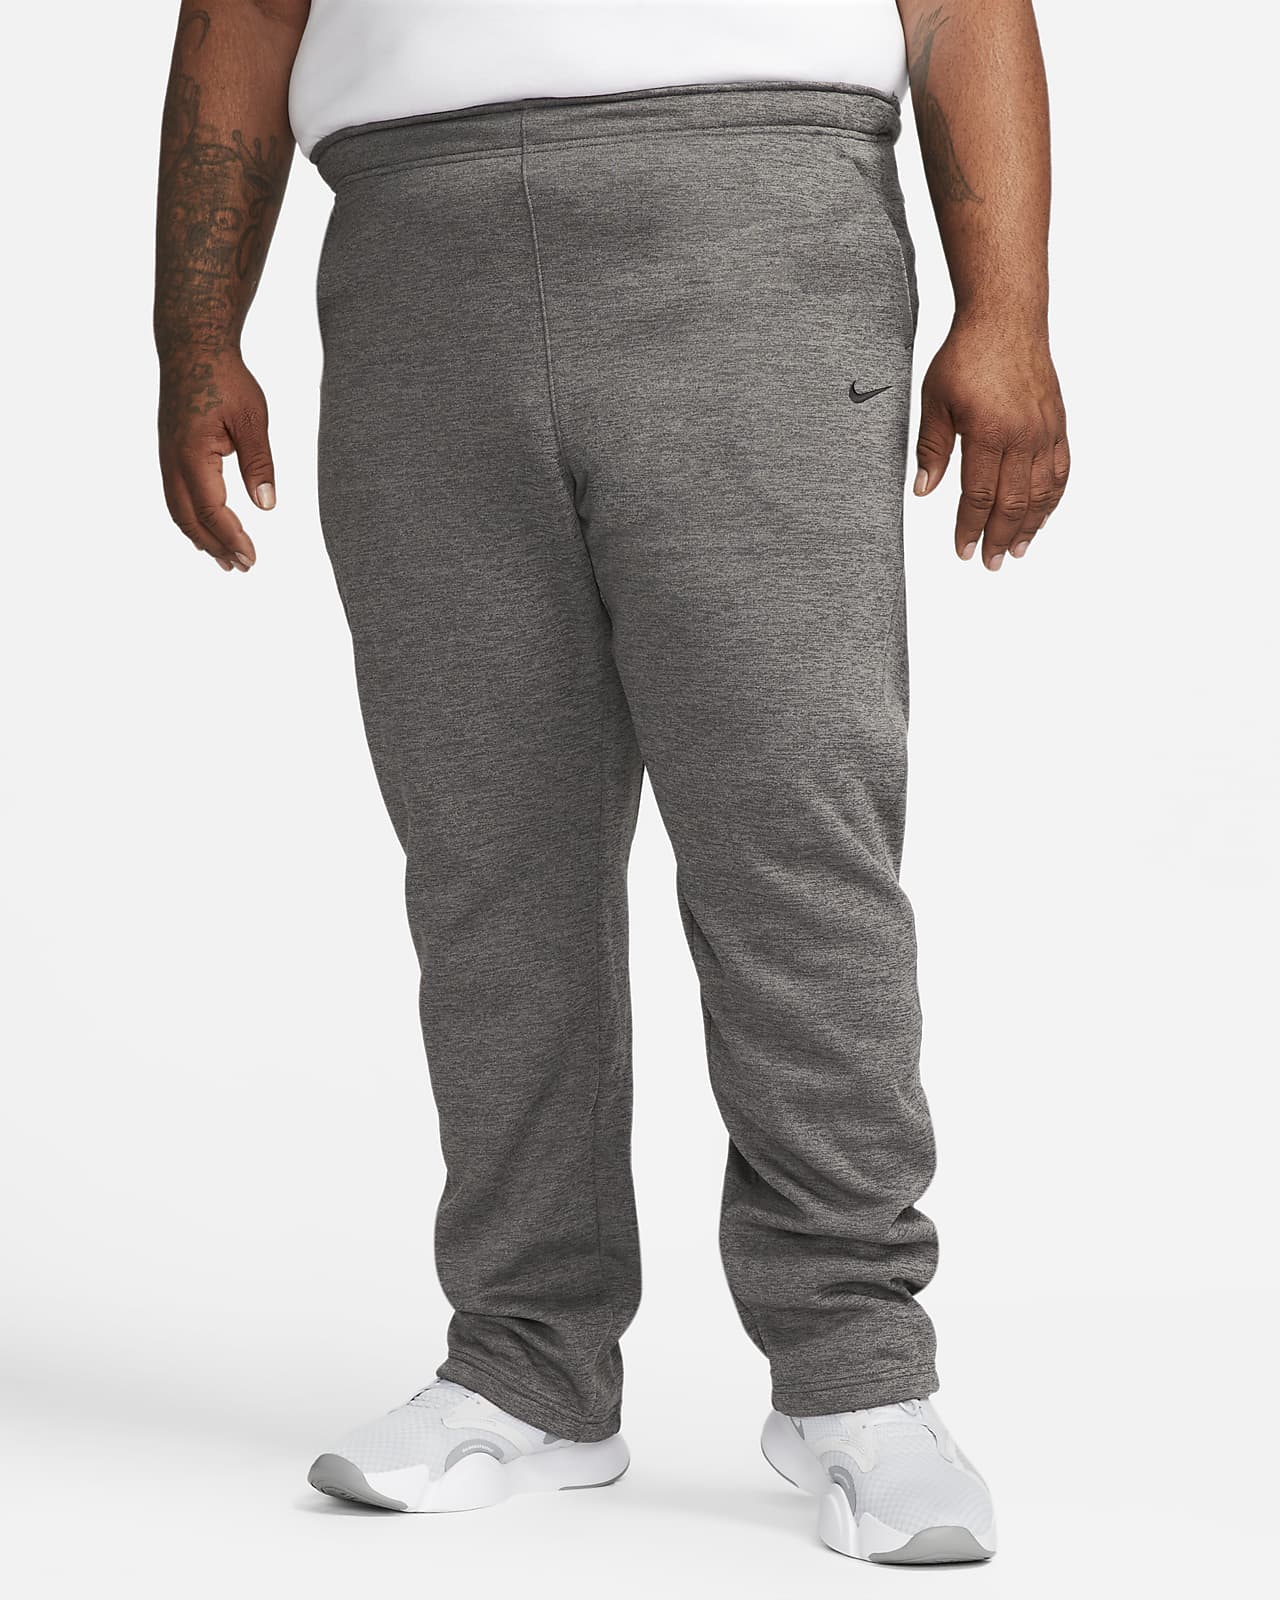 Relaxed Fit Tall Training Pant Navy For Men